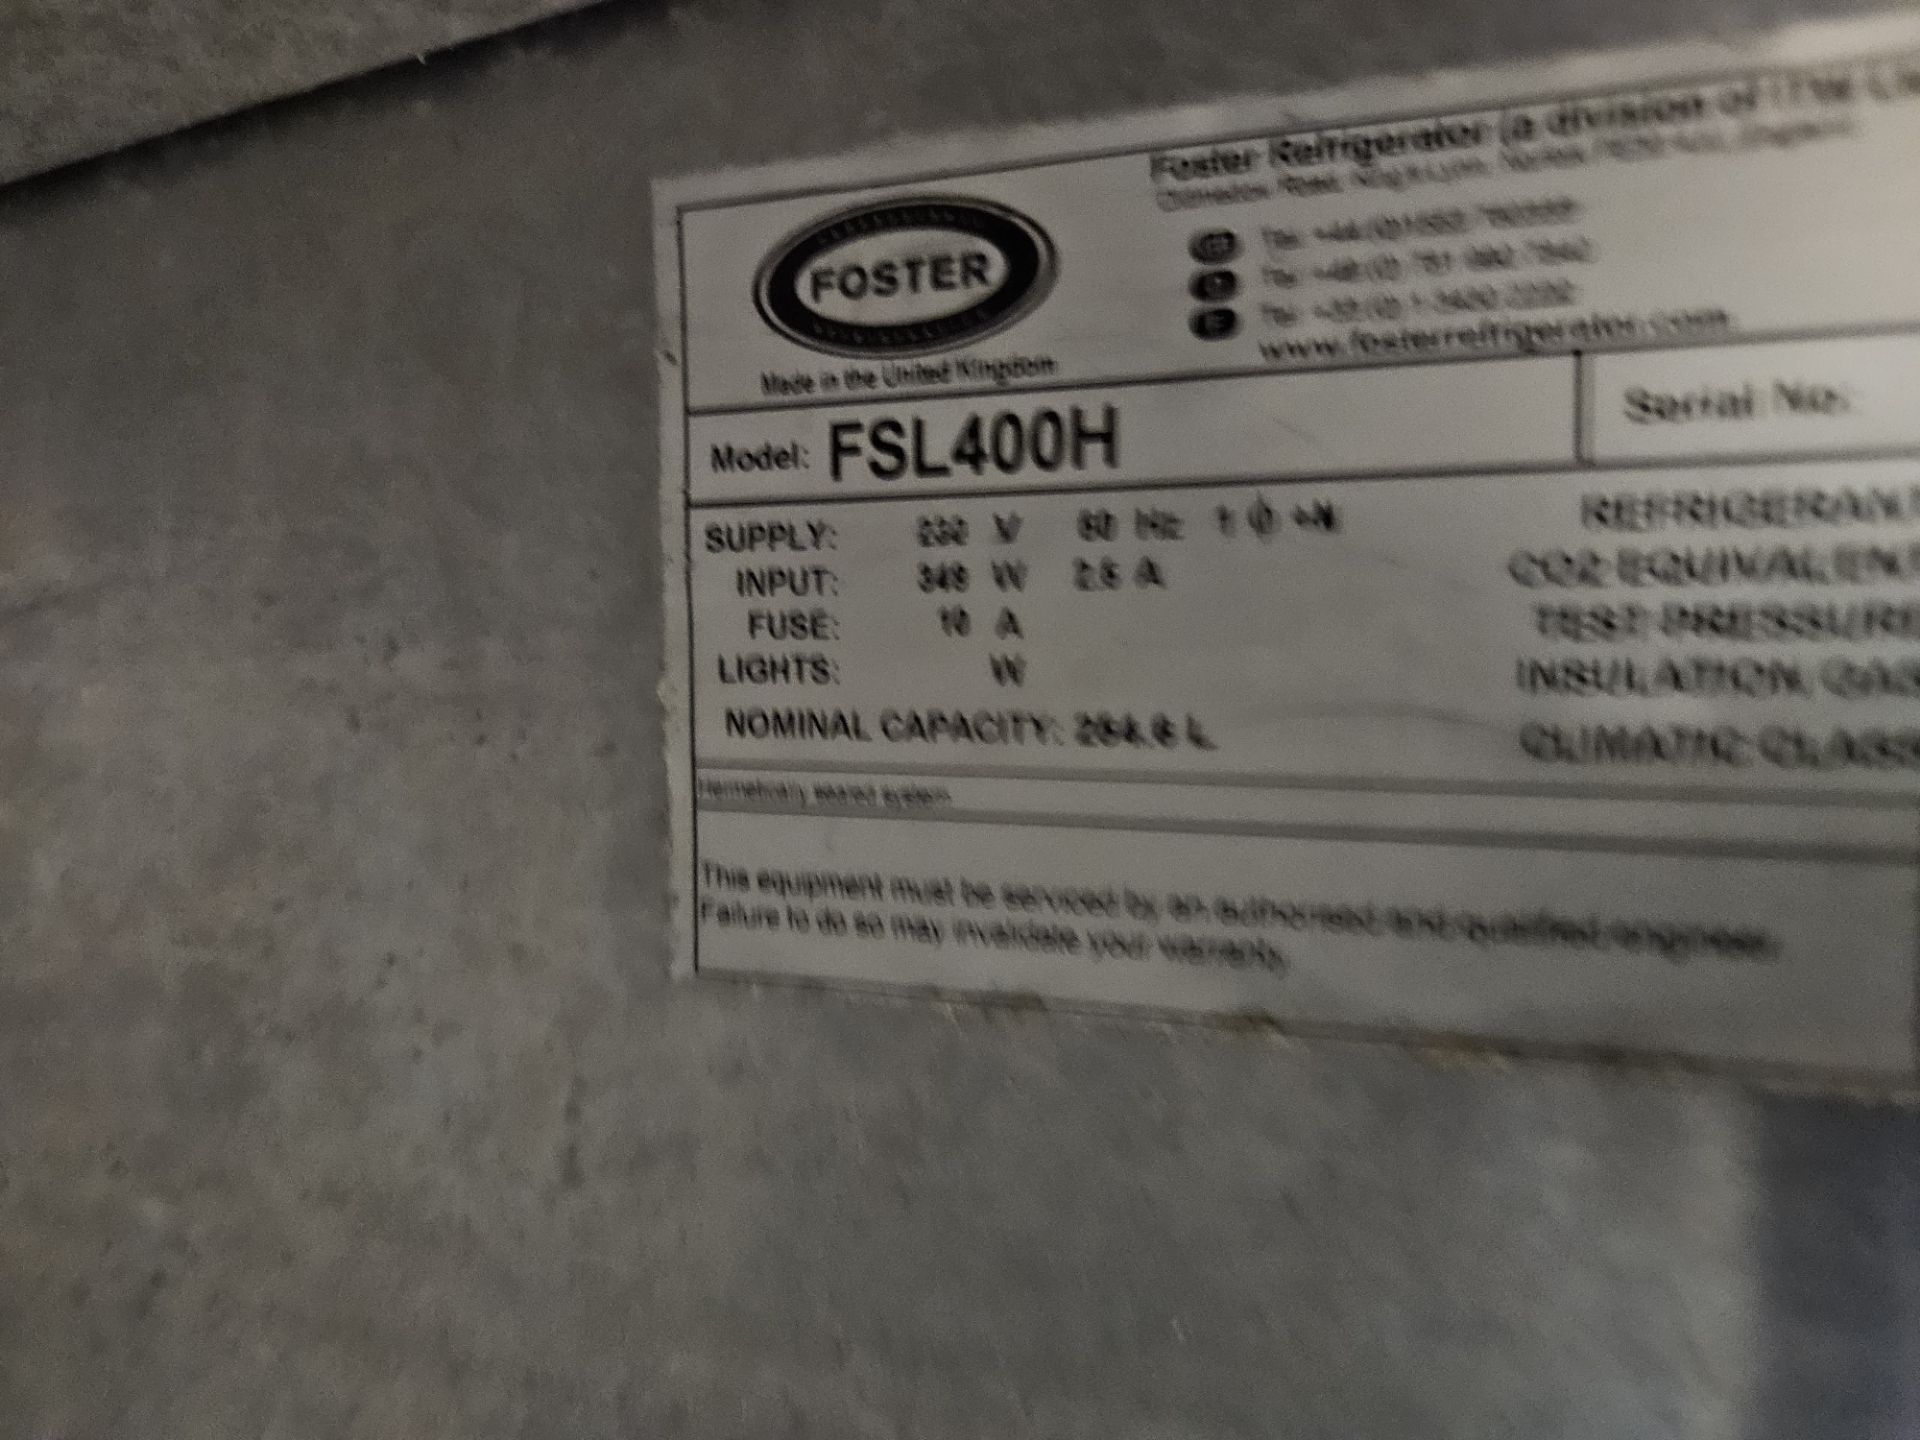 Fosters Professional Refrigeration Fsl 400M Chiller serial E5529440 - Image 2 of 3